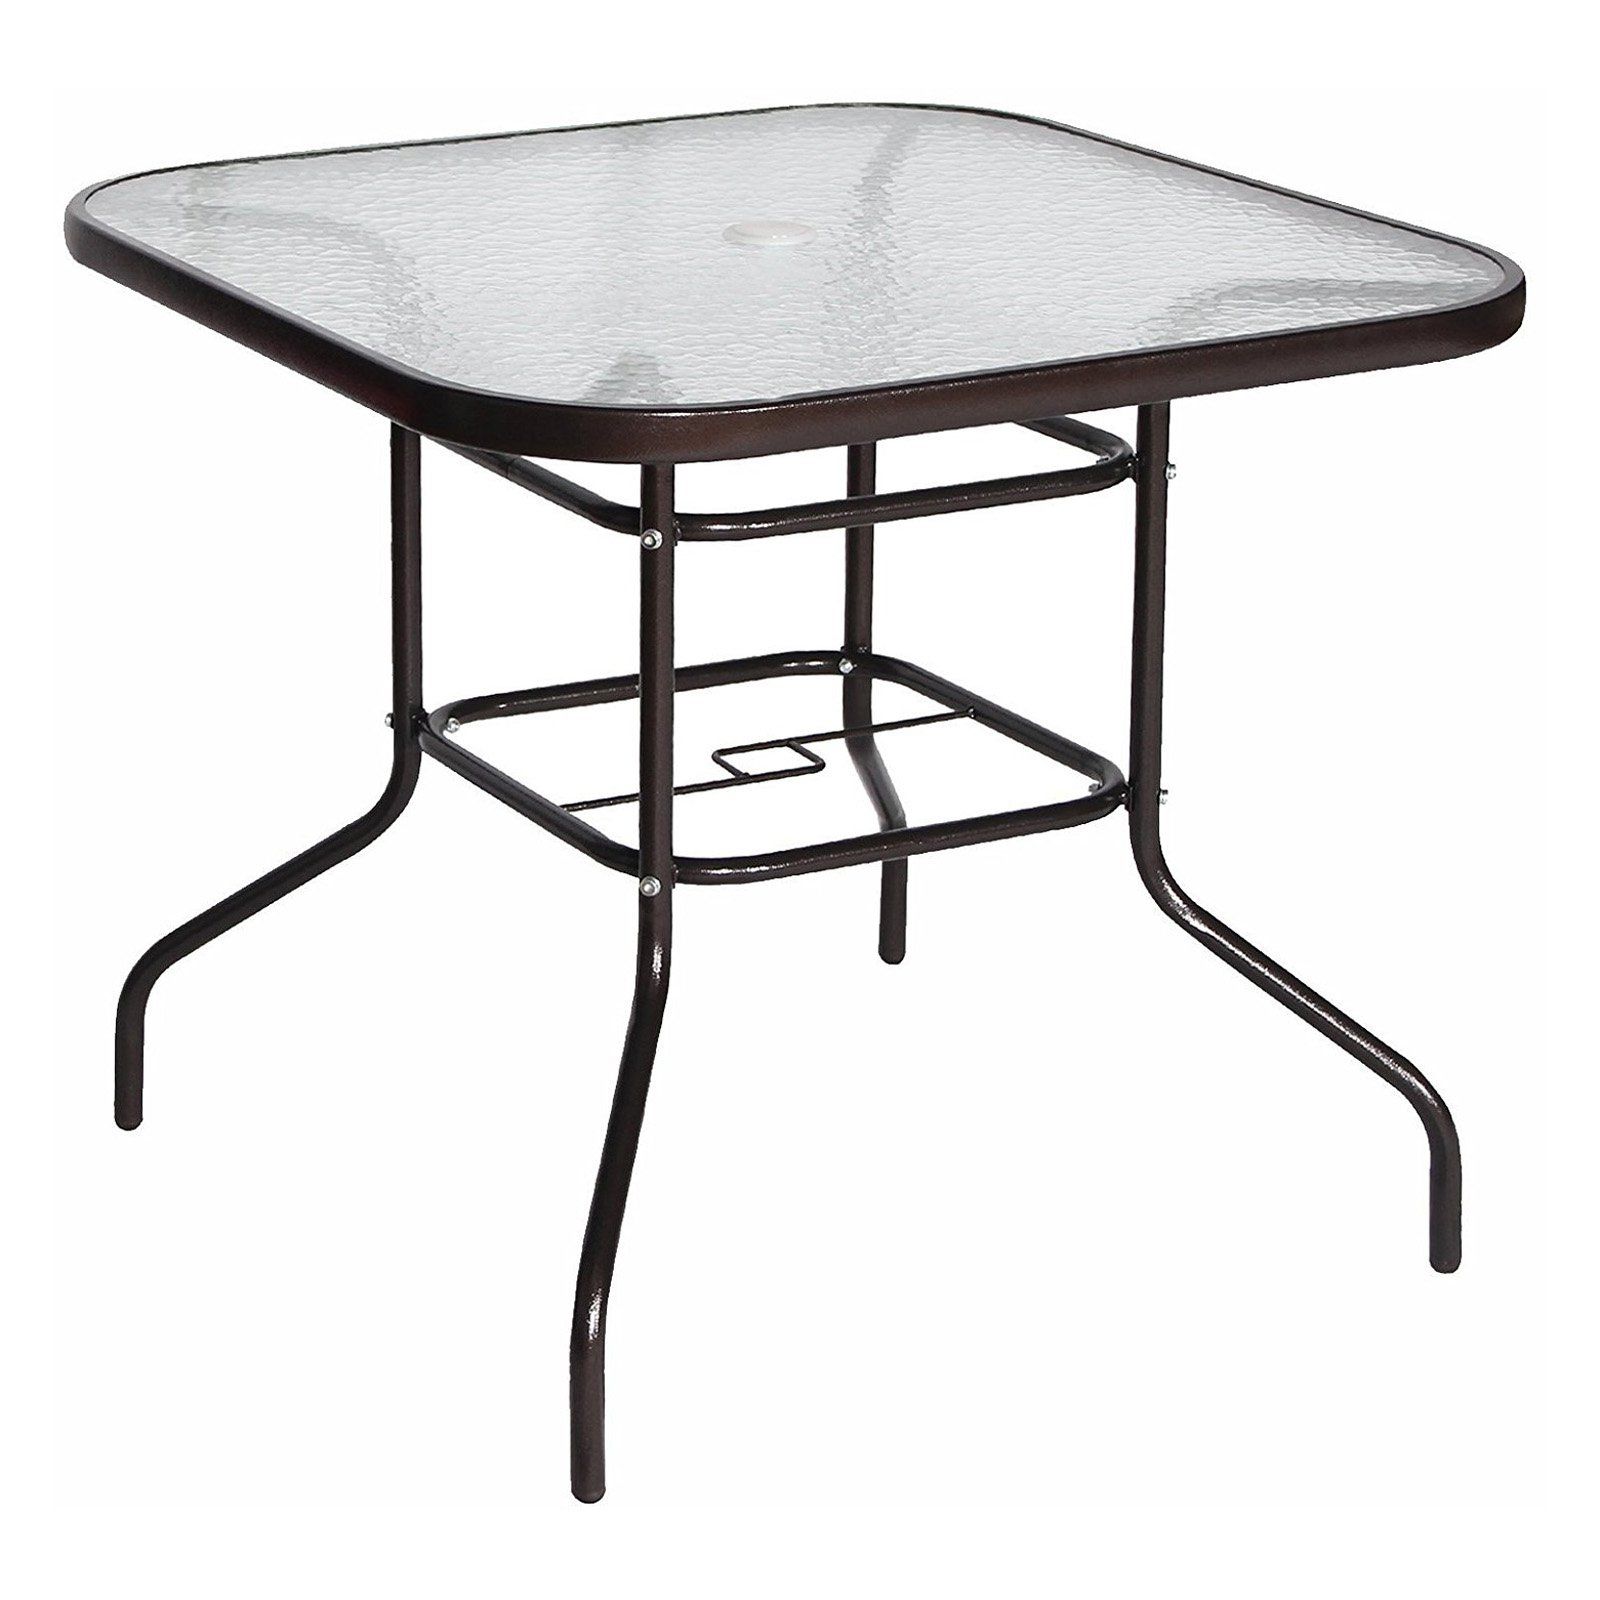 Mcmichael 32'' Dining Tables Within Trendy Cloud Mountain Square Wrought Iron 32 In. Patio Dining (Gallery 11 of 20)